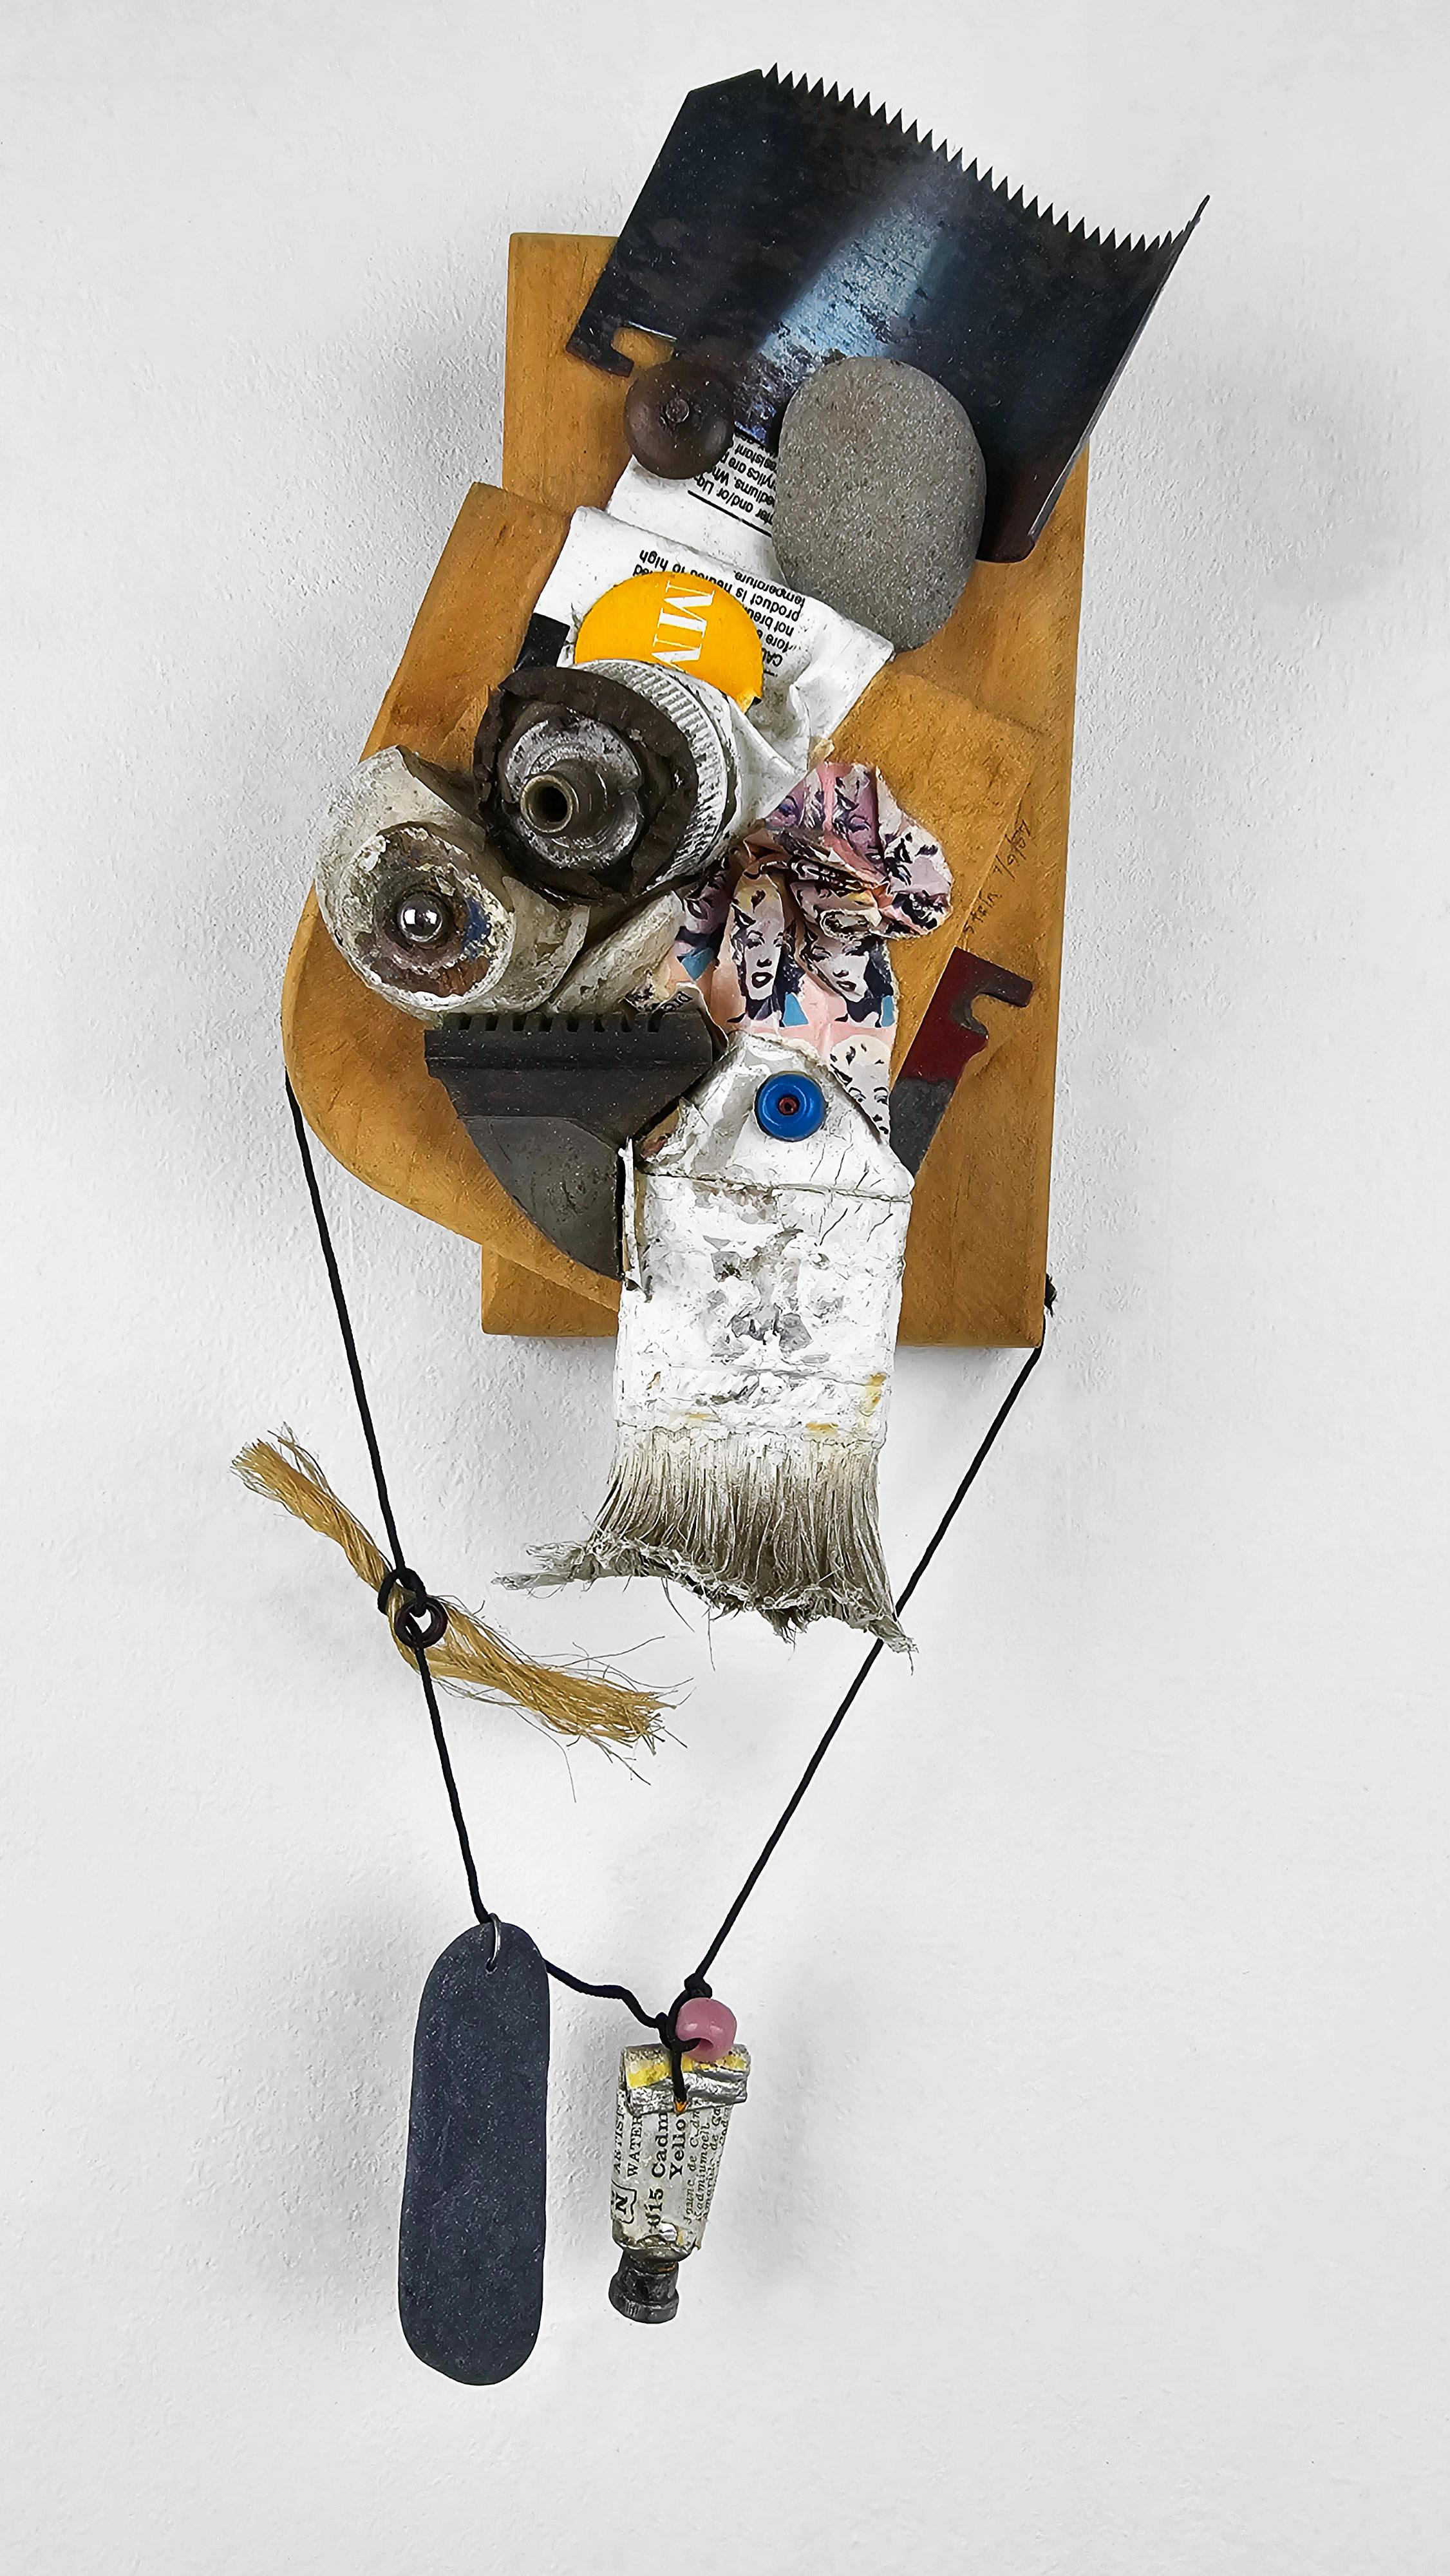 What does assemblage mean in art?